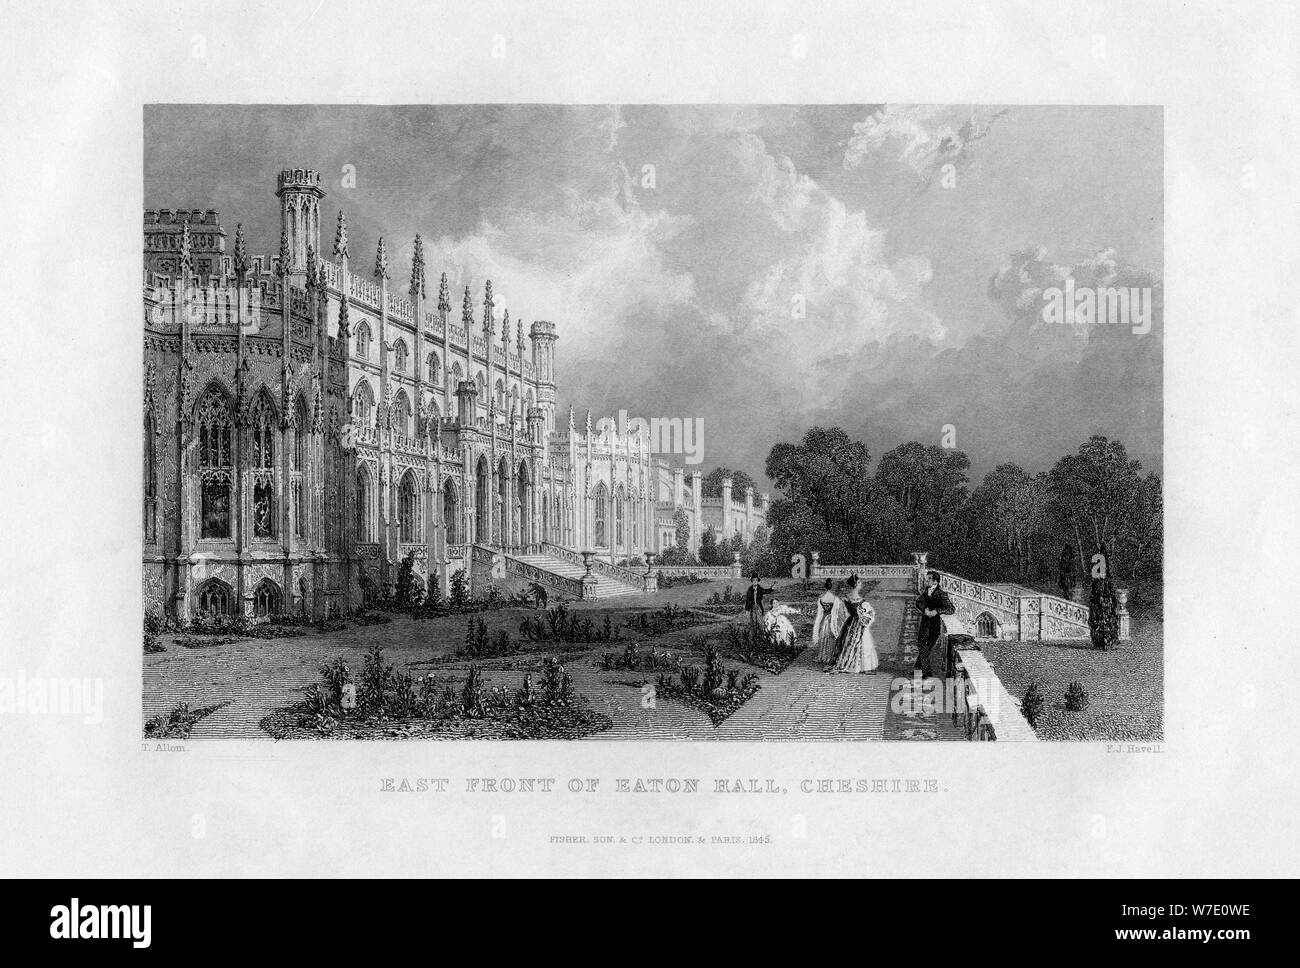 East front of Eaton Hall, Cheshire, 1845. Artist: Frederick James Havell Stock Photo